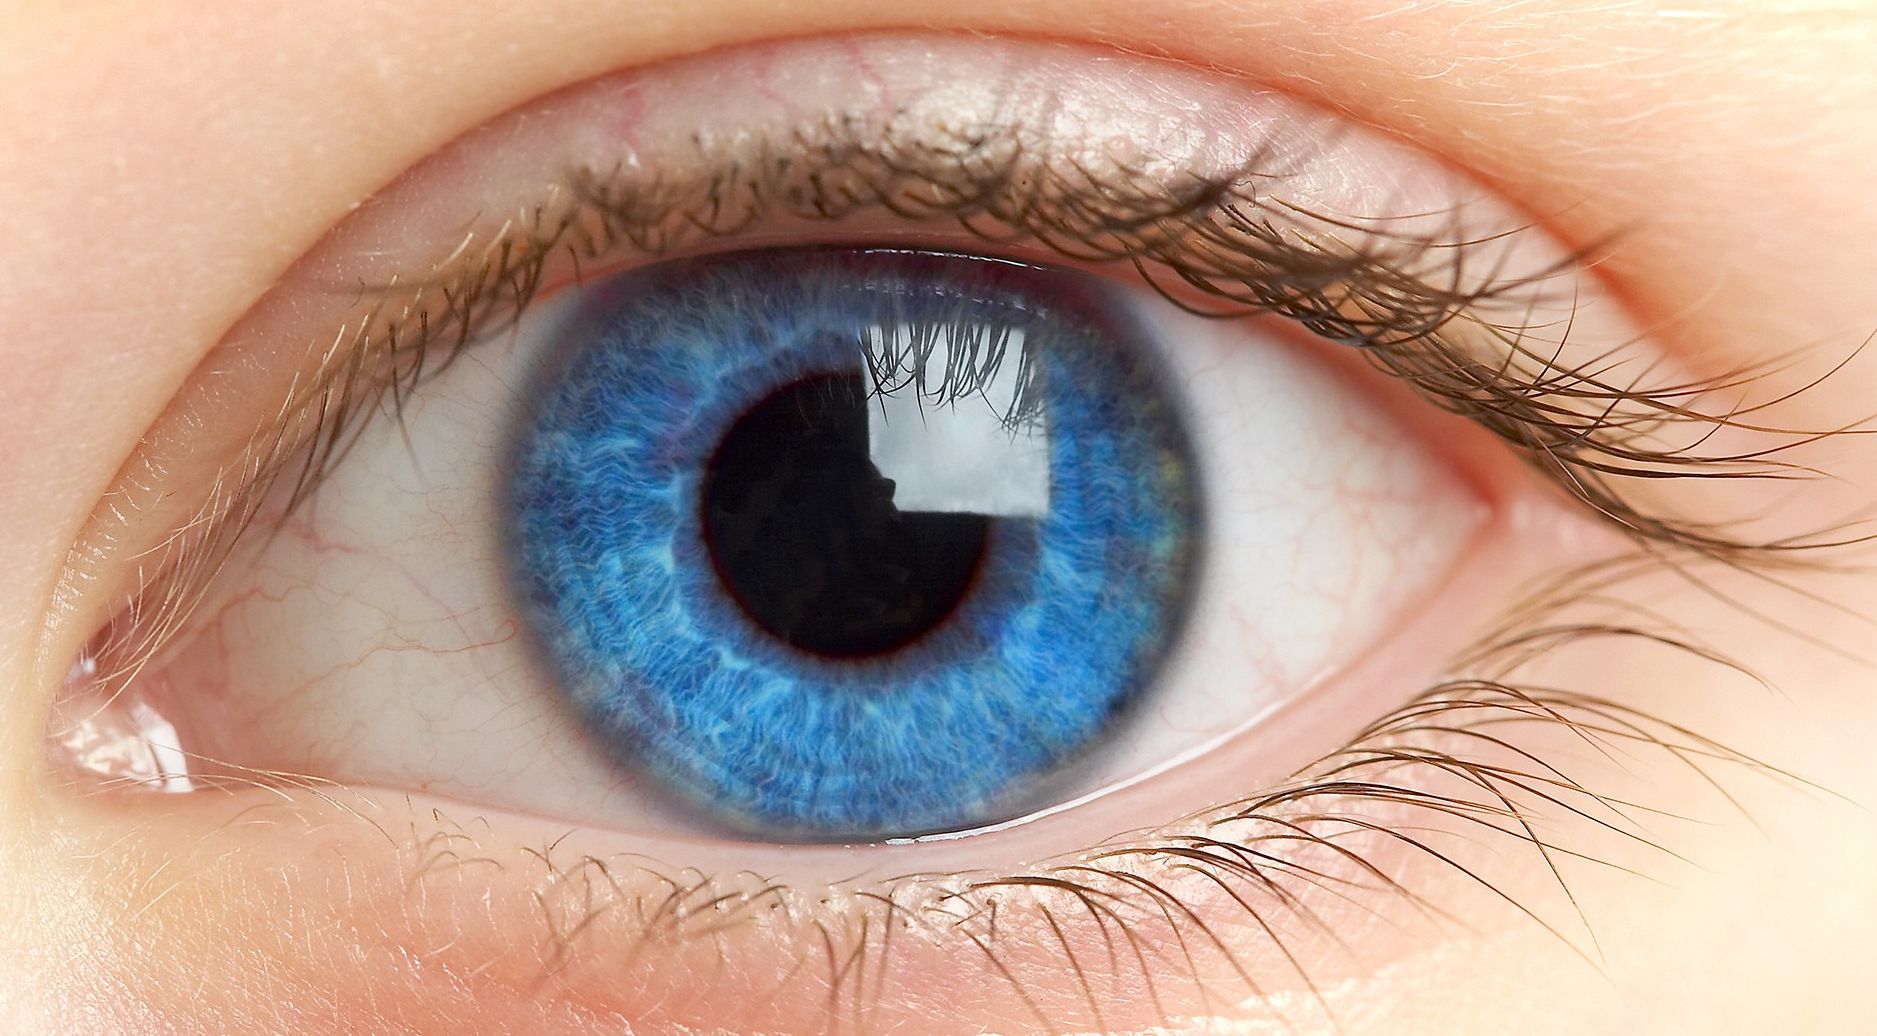 Finnish scientists have created an artificial iris of the eye